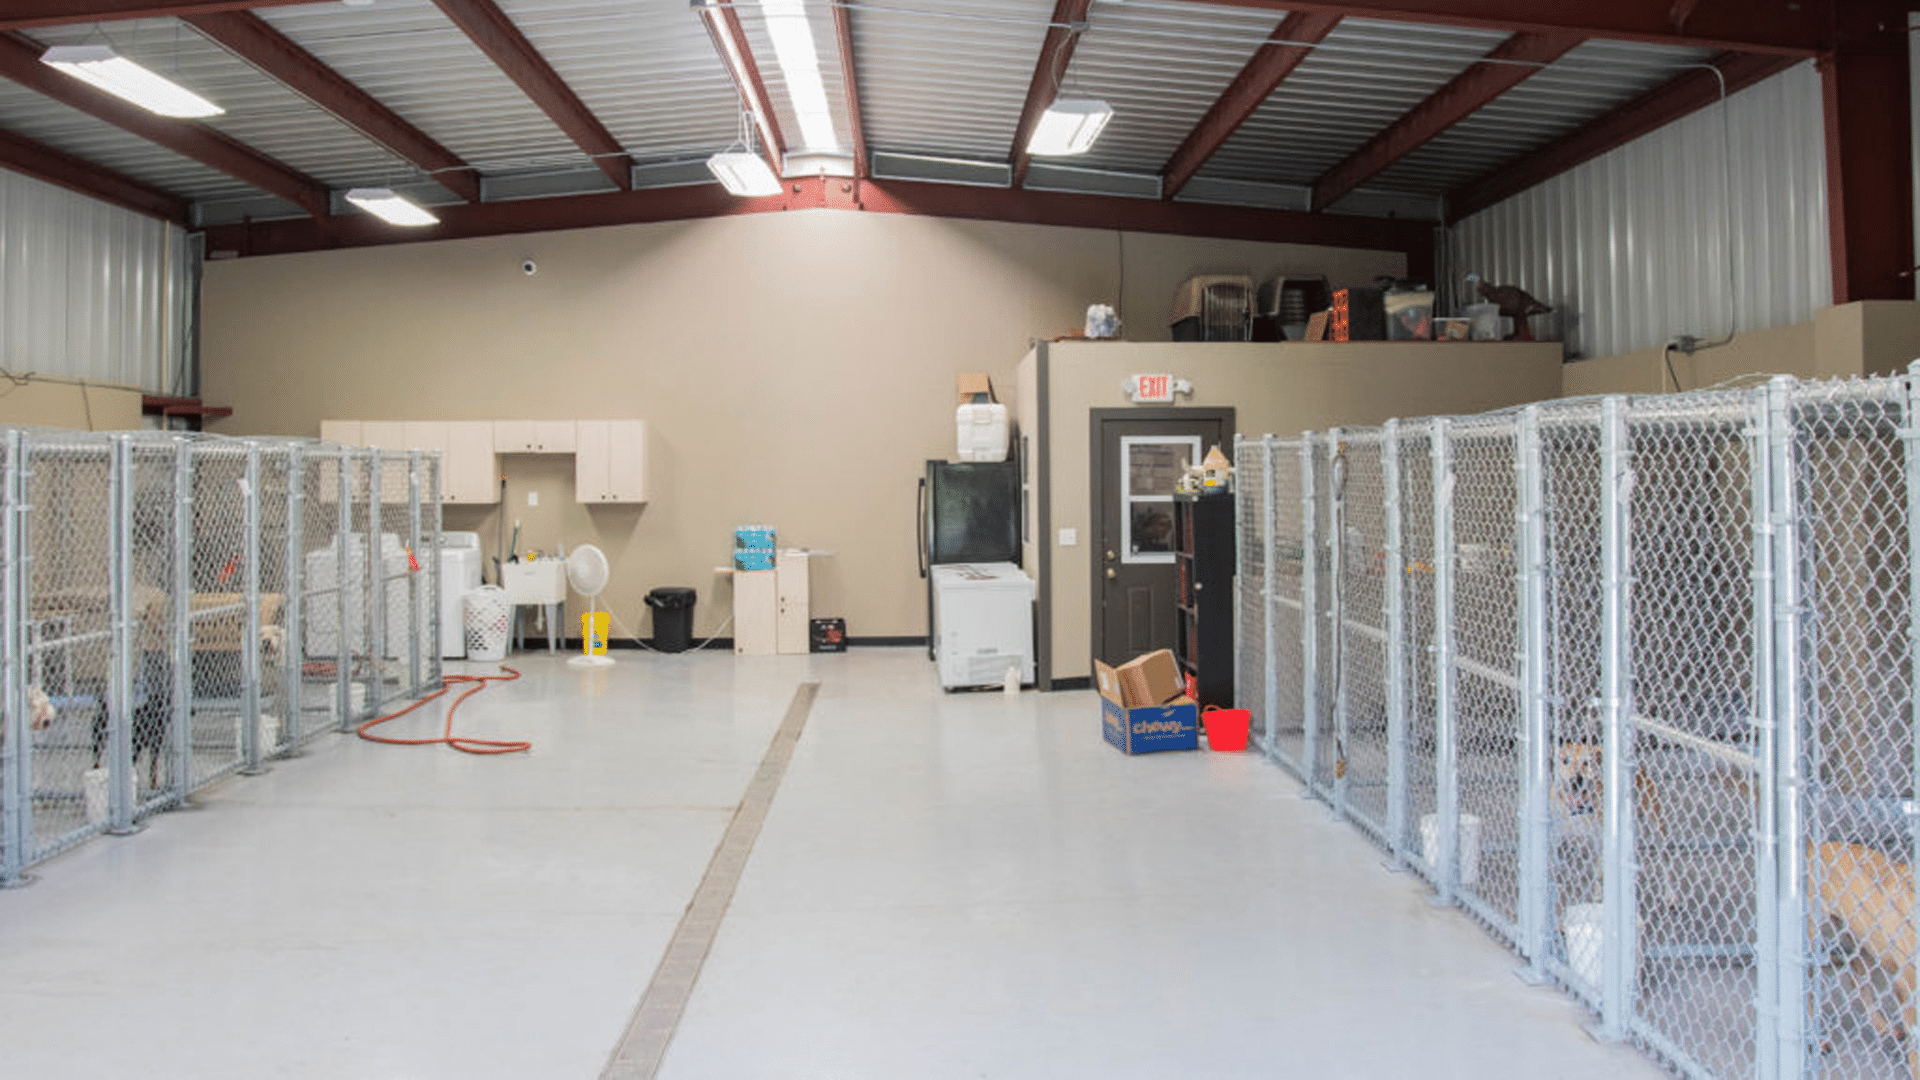 Animal Shelter made From a metal building - Outdoor Options - Eatonton Georgia